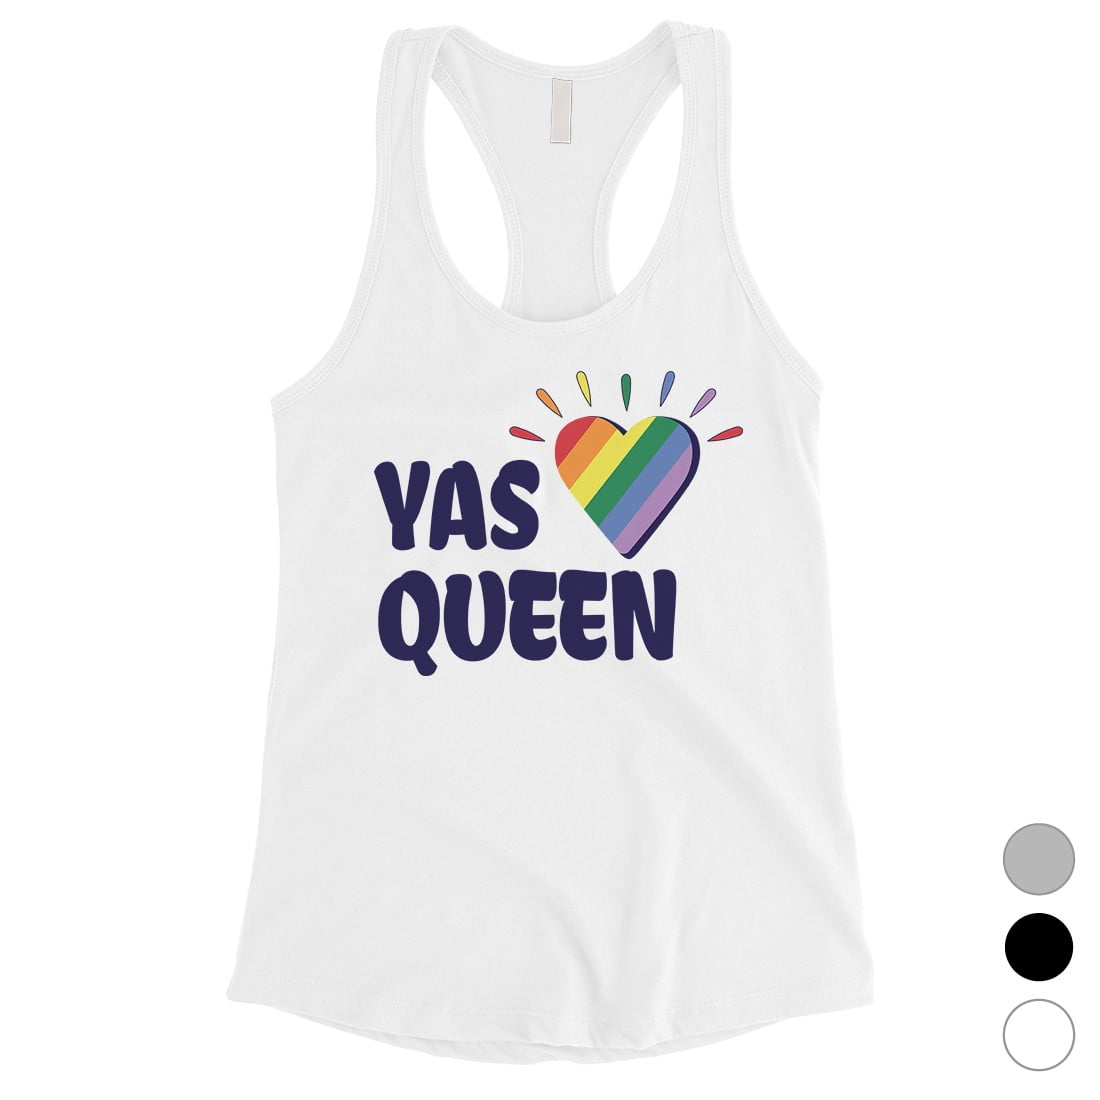 Yes queen tank top lgbtq tank top yas queen funny workout tank top gay pride tank top funny gym tank top